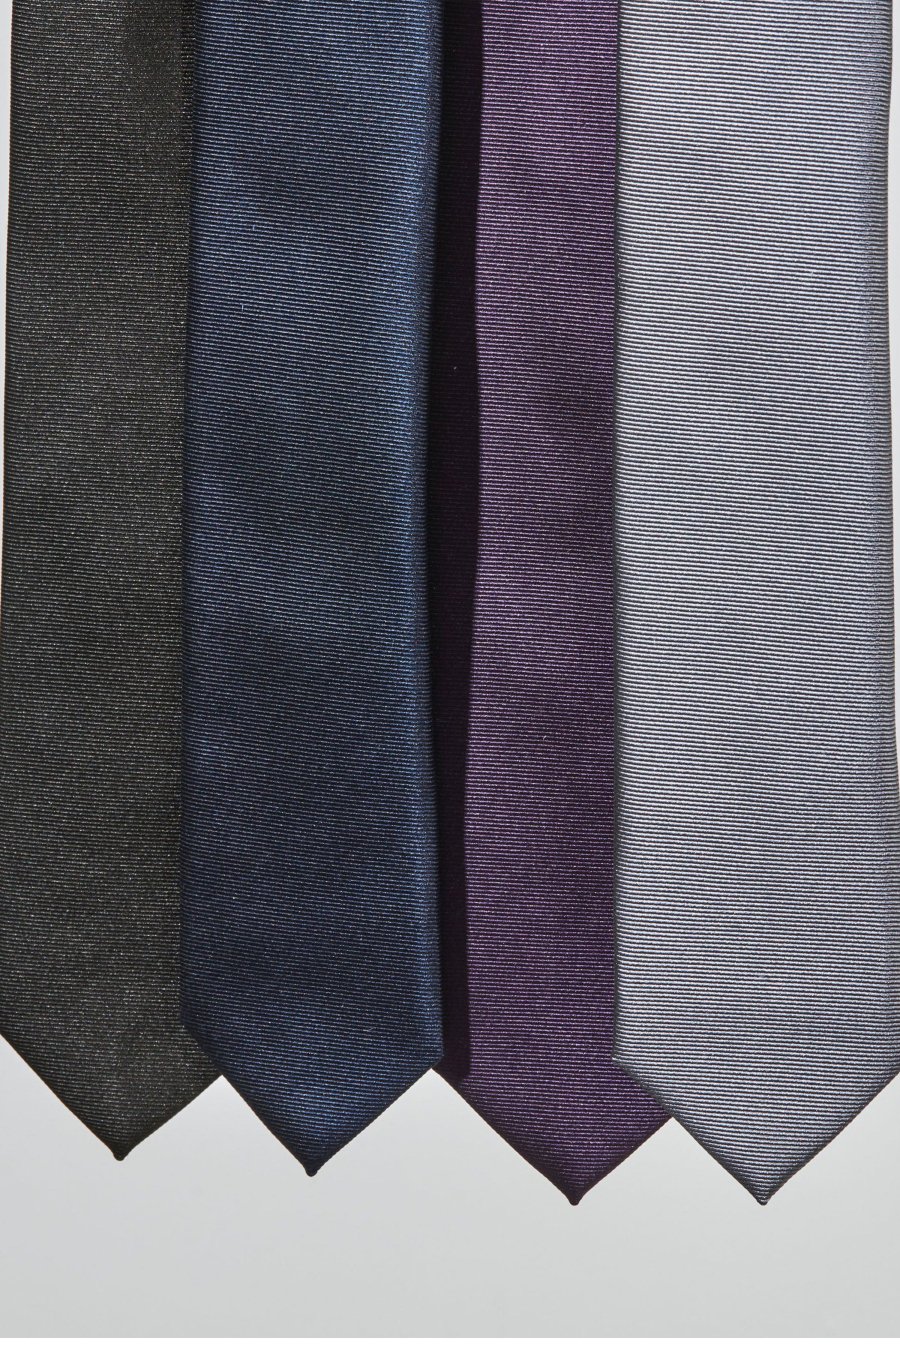 LITTLEBIG  Narrow Tie(Black or Navy)<img class='new_mark_img2' src='https://img.shop-pro.jp/img/new/icons15.gif' style='border:none;display:inline;margin:0px;padding:0px;width:auto;' />